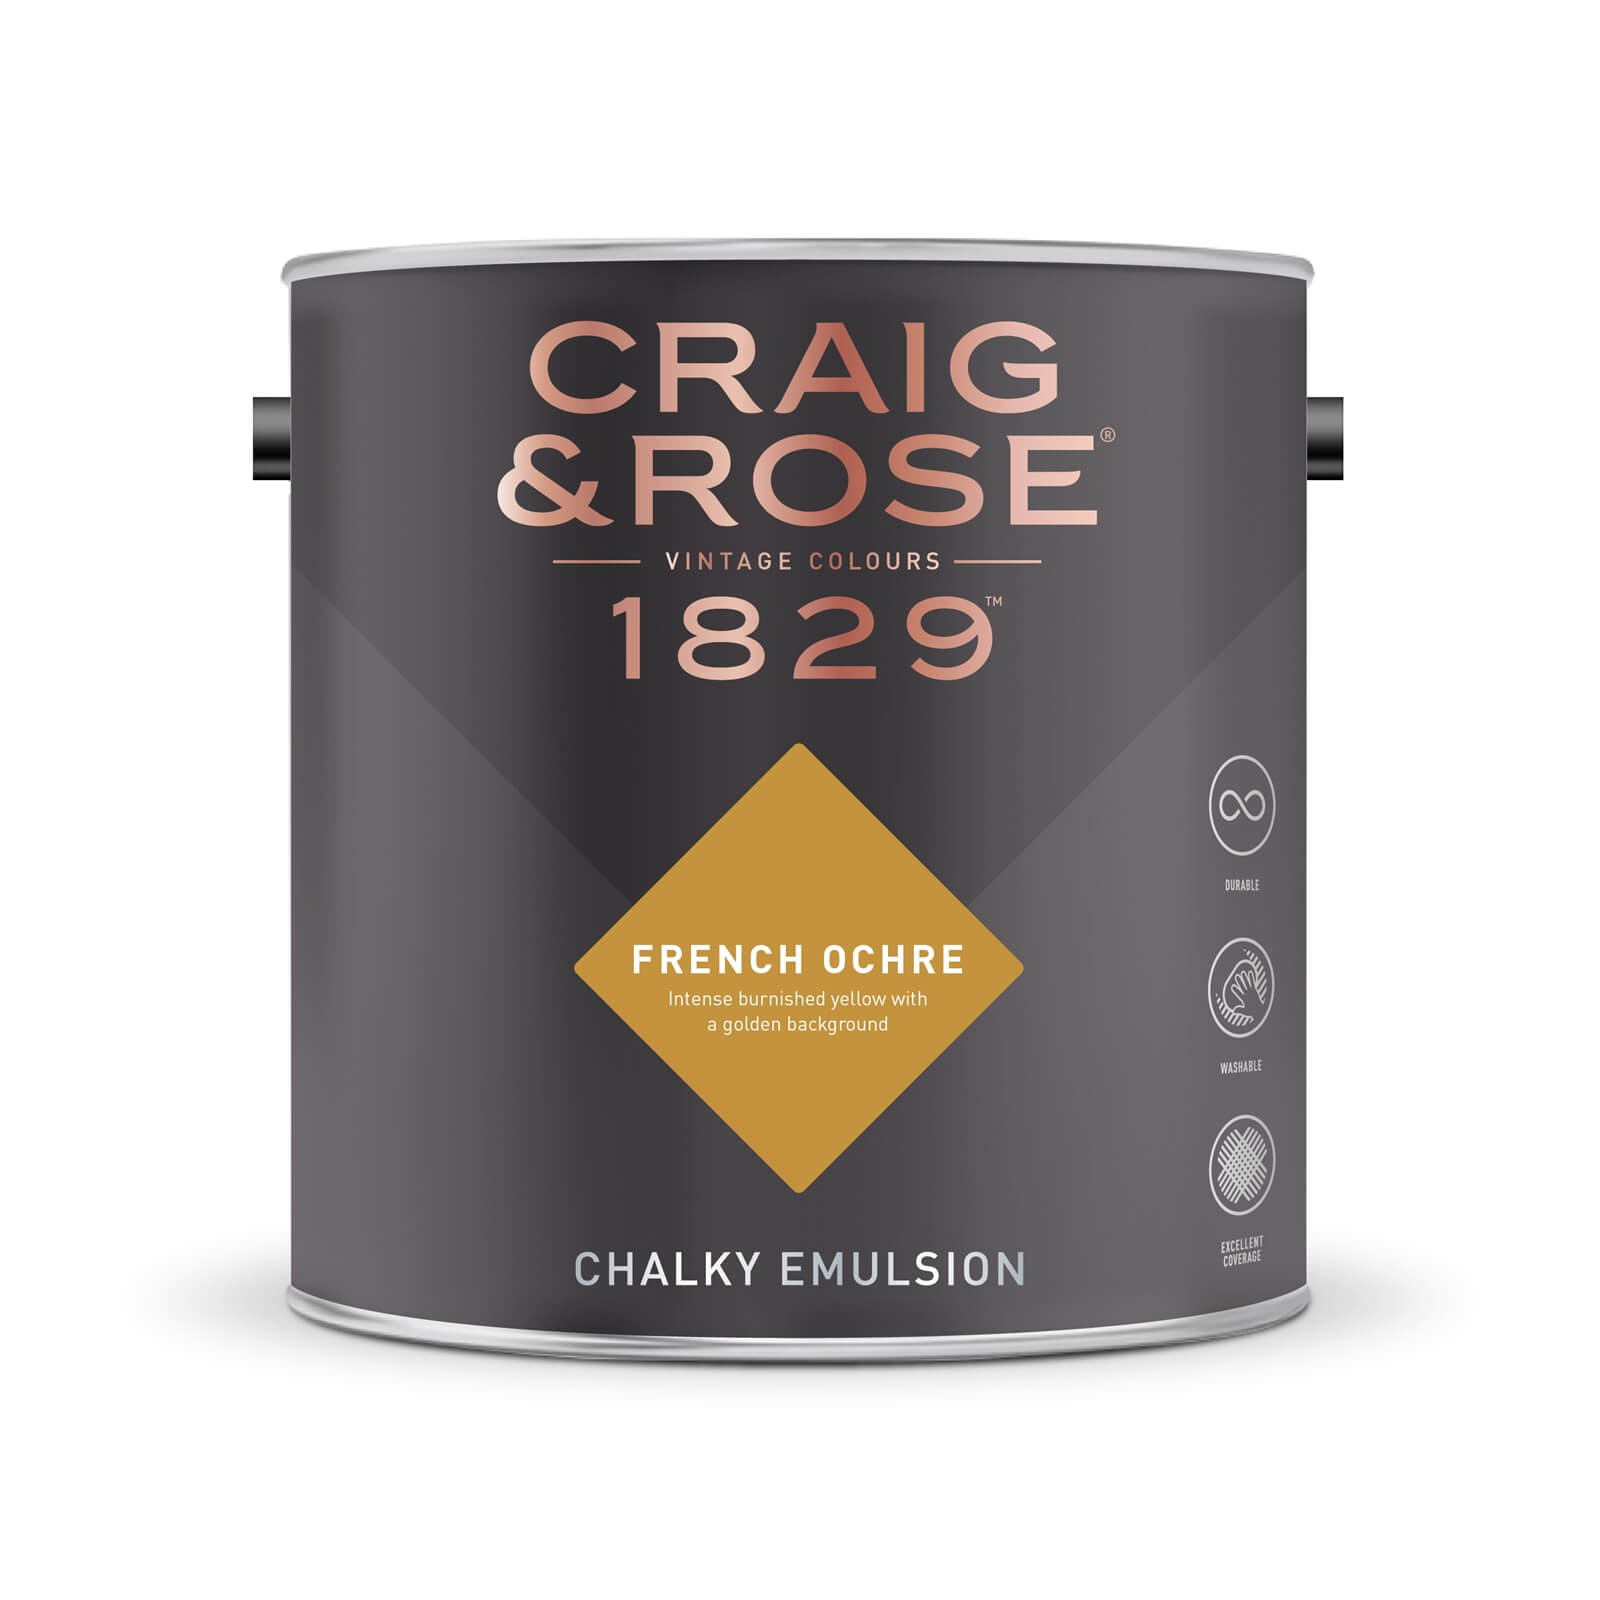 Craig & Rose 1829 Chalky Emulsion Paint French Ochre - 5L